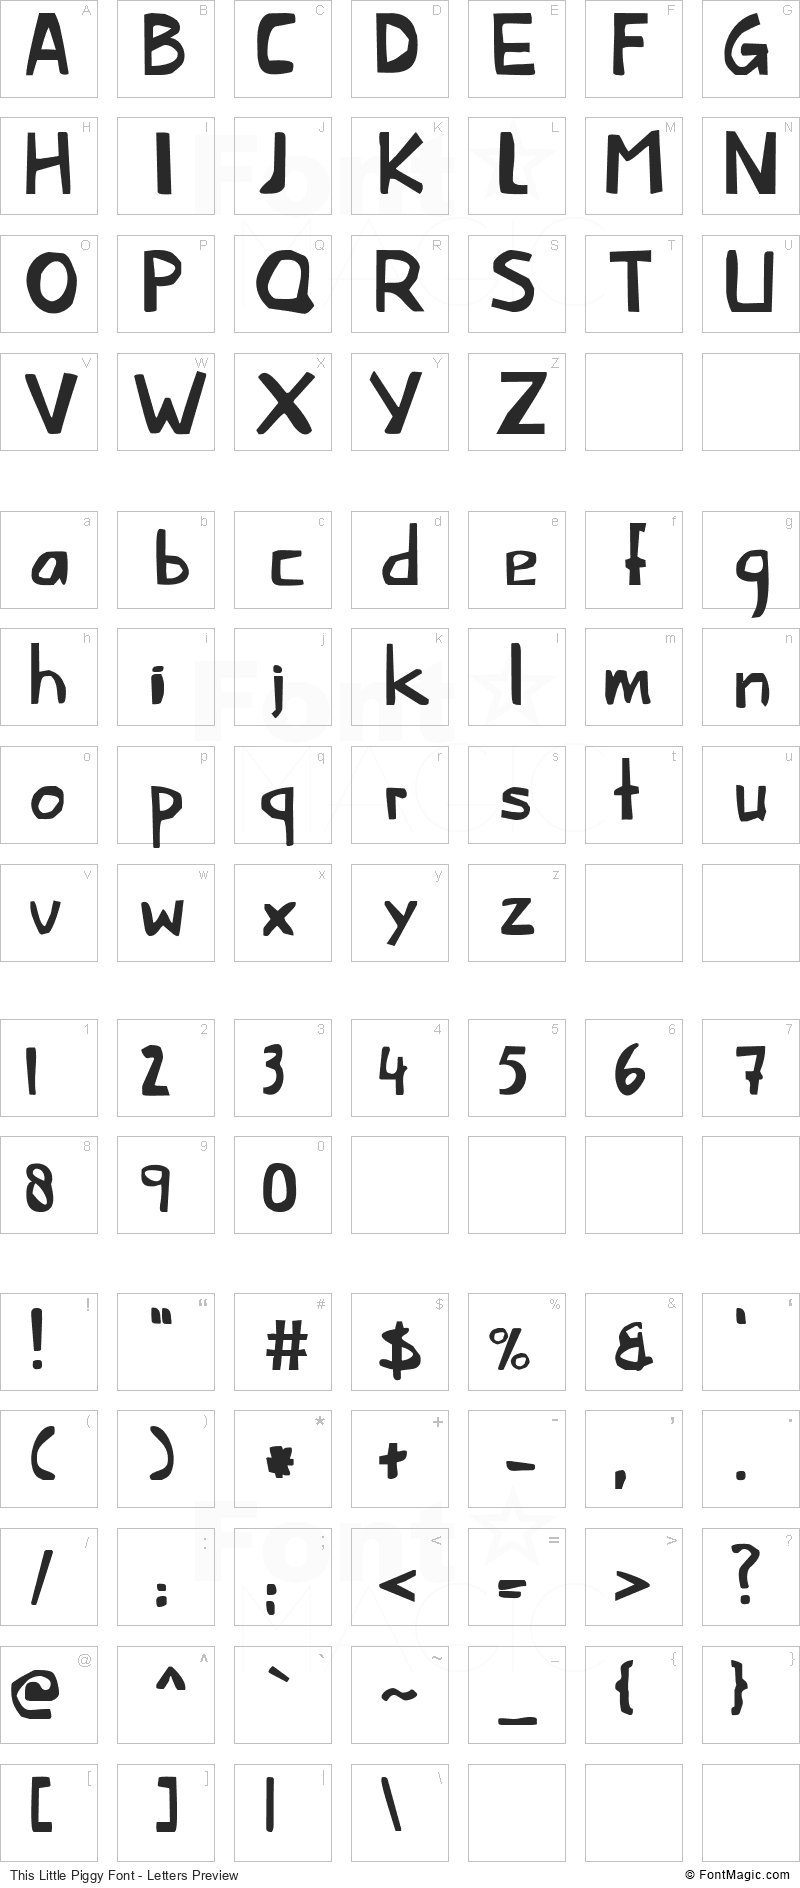 This Little Piggy Font - All Latters Preview Chart